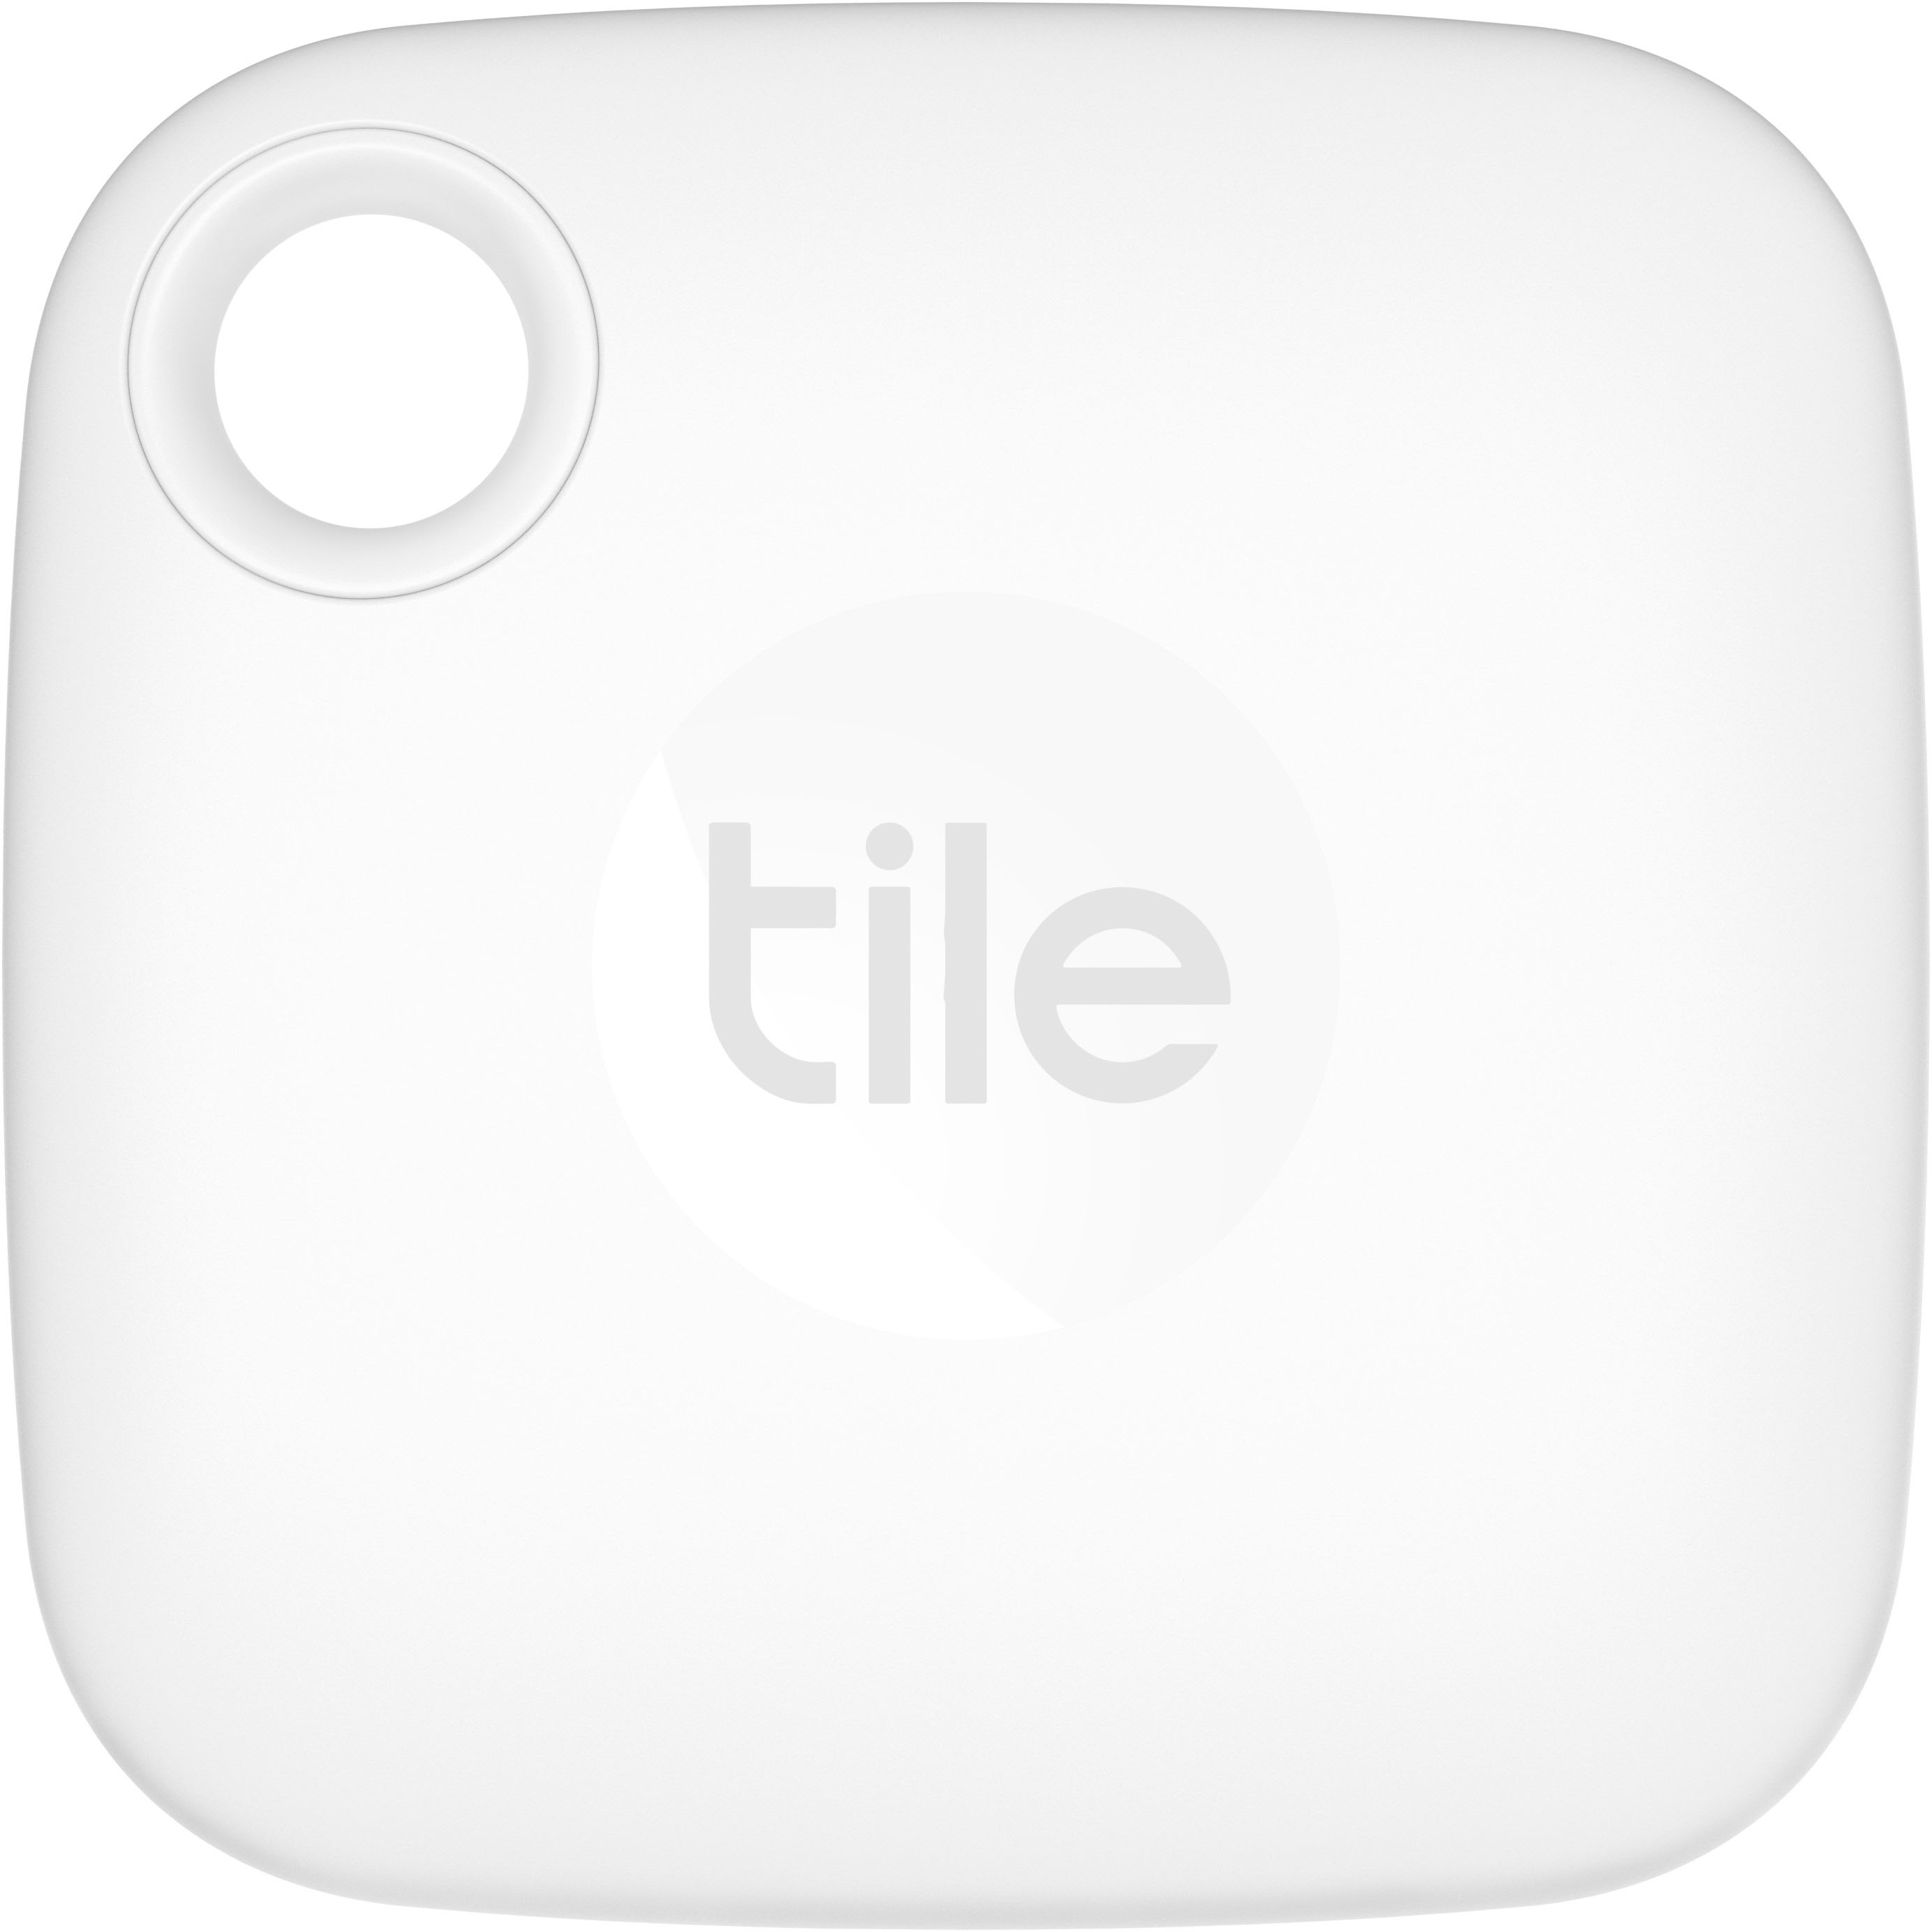 Tile Pro (2022) 1-Pack. Bluetooth Tracker, Keys Finder and Item Locator for  Keys, Bags, and More; Up to 400 ft Range. Water-Resistant. iOS and Android